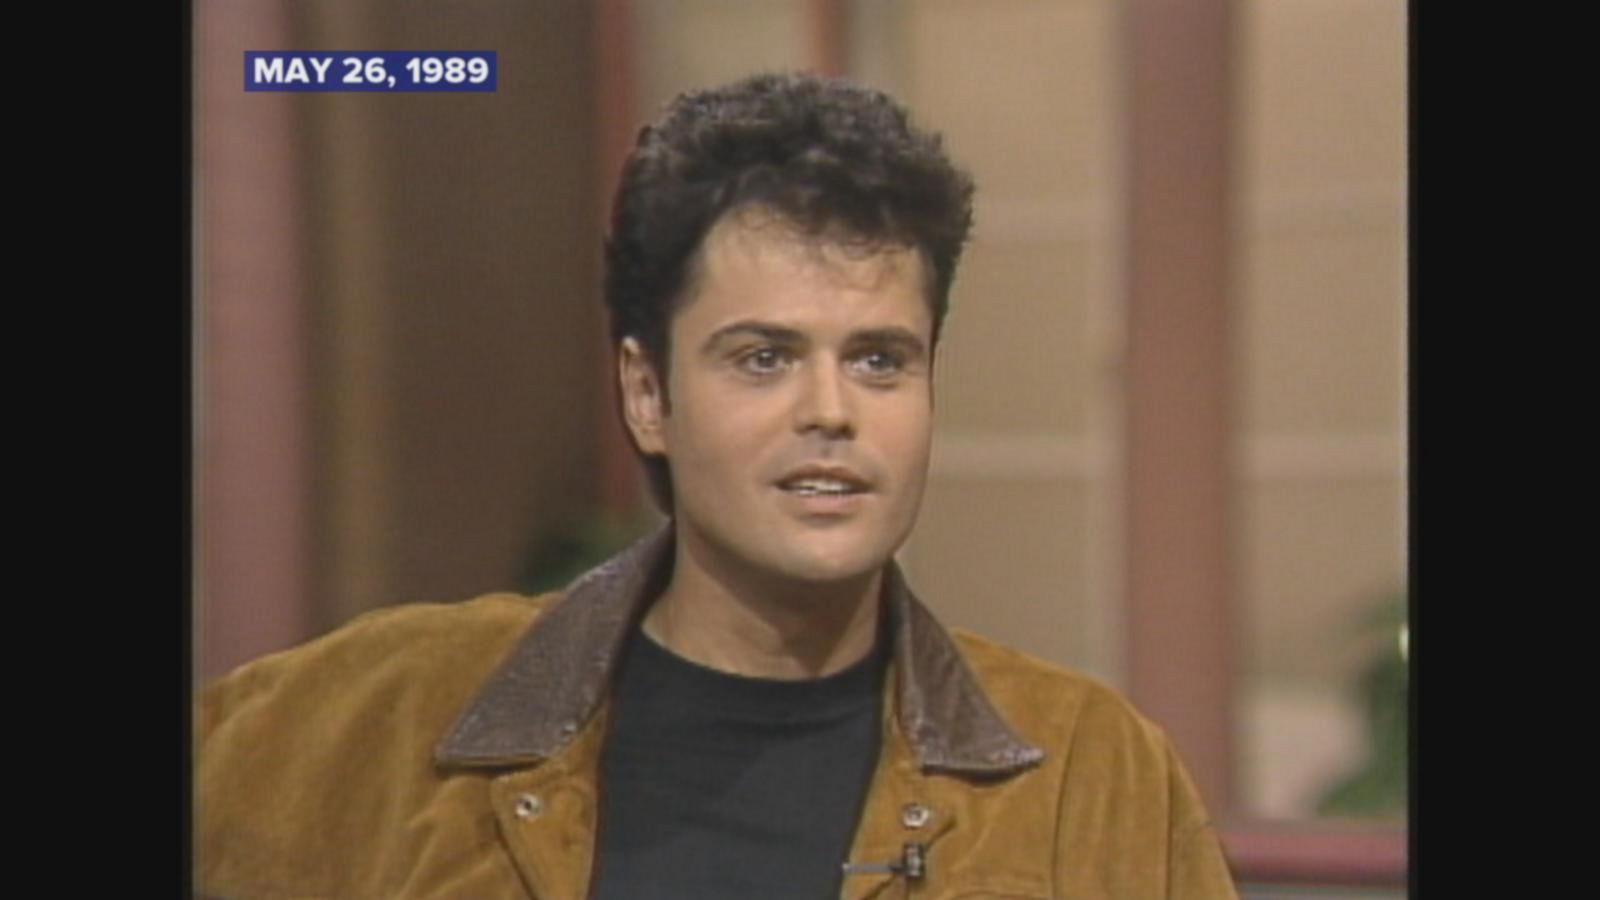 May 26, 1989: Donny Osmond on his new image - Good Morning America